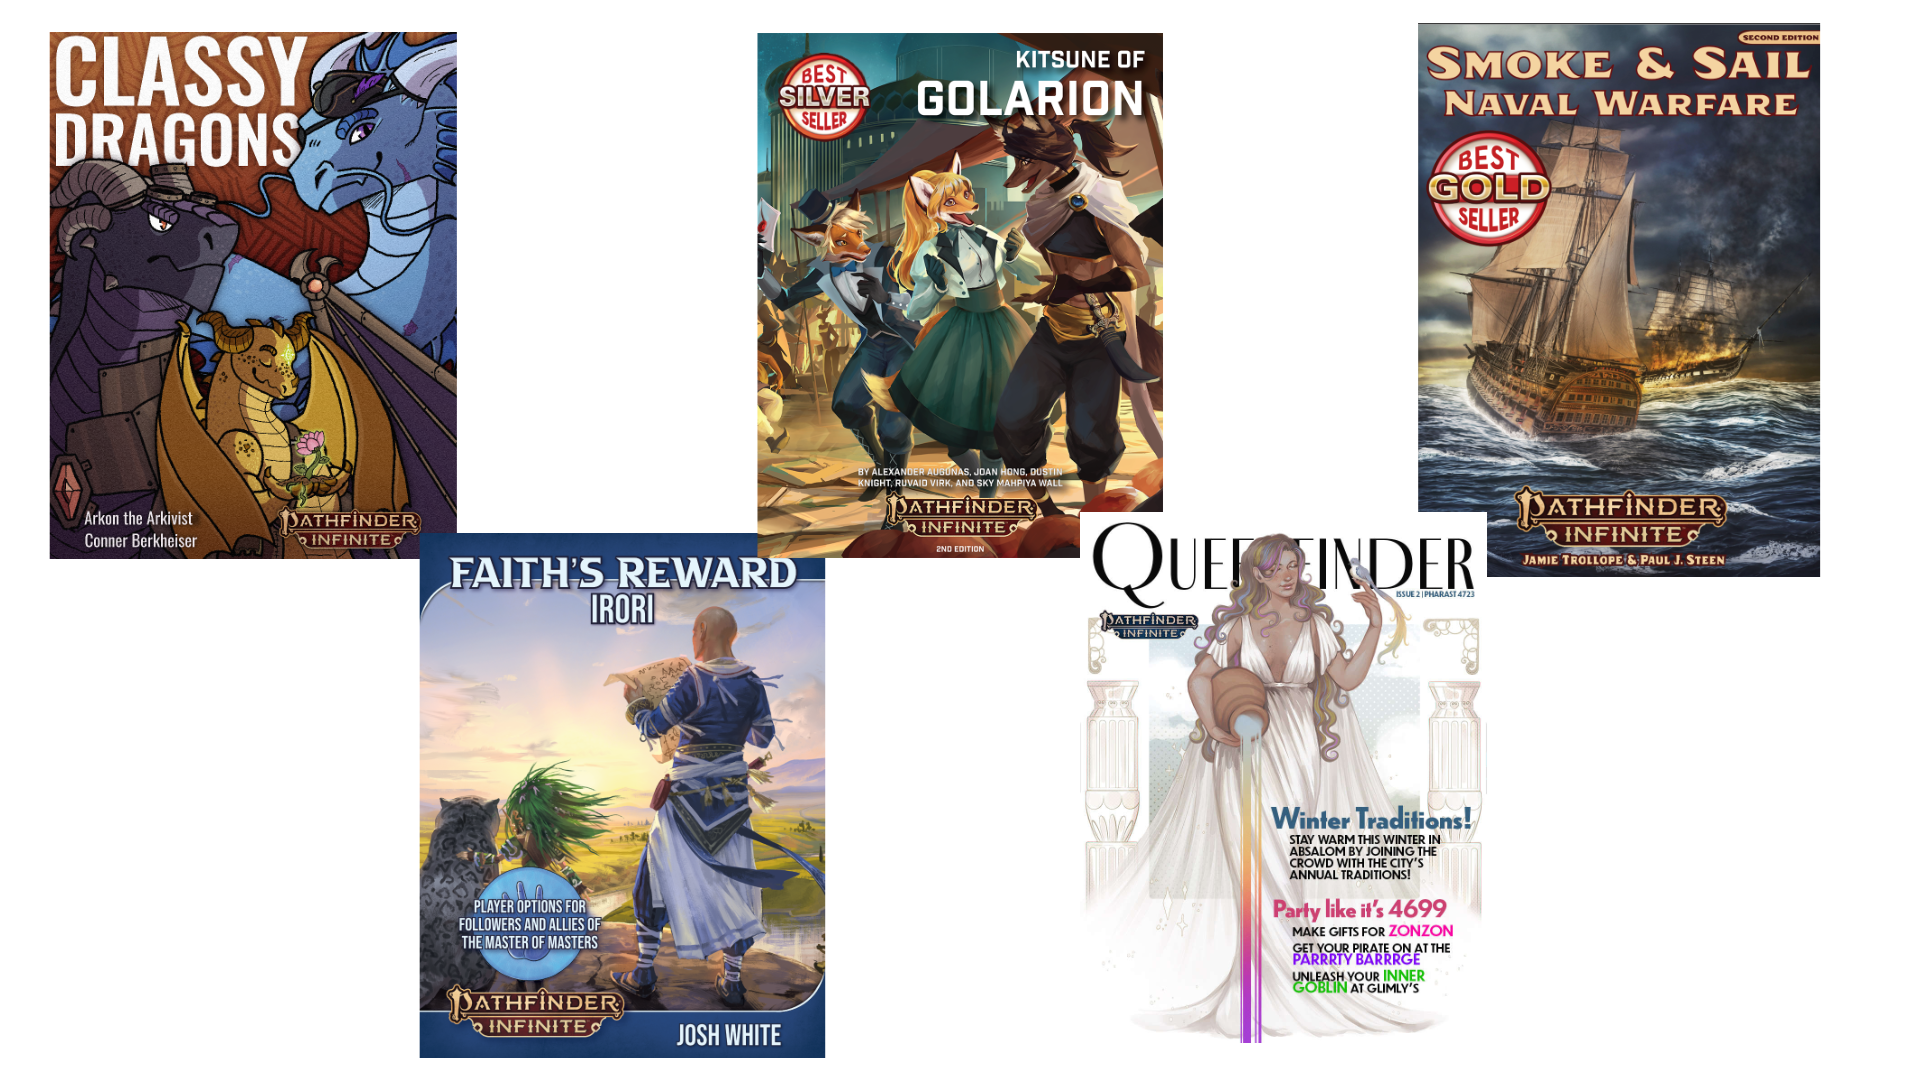 A spread of the covers for the Pathfinder Infinite Top Performers.